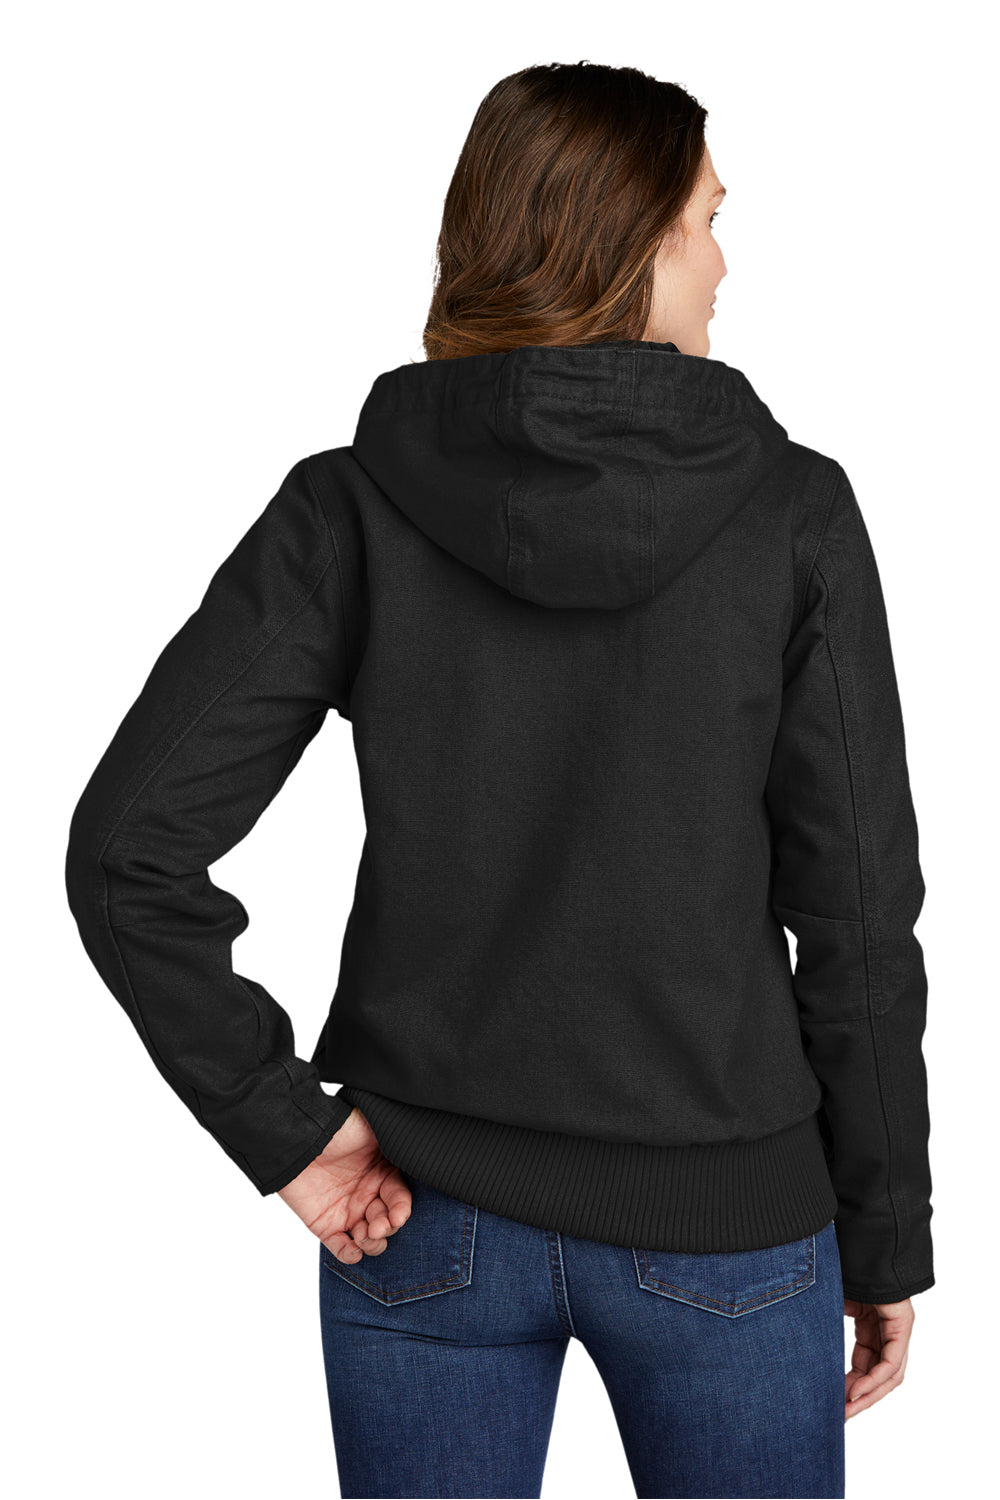 Carhartt CT104053 Womens Active Washed Duck Full Zip Hooded Jacket Black Model Back